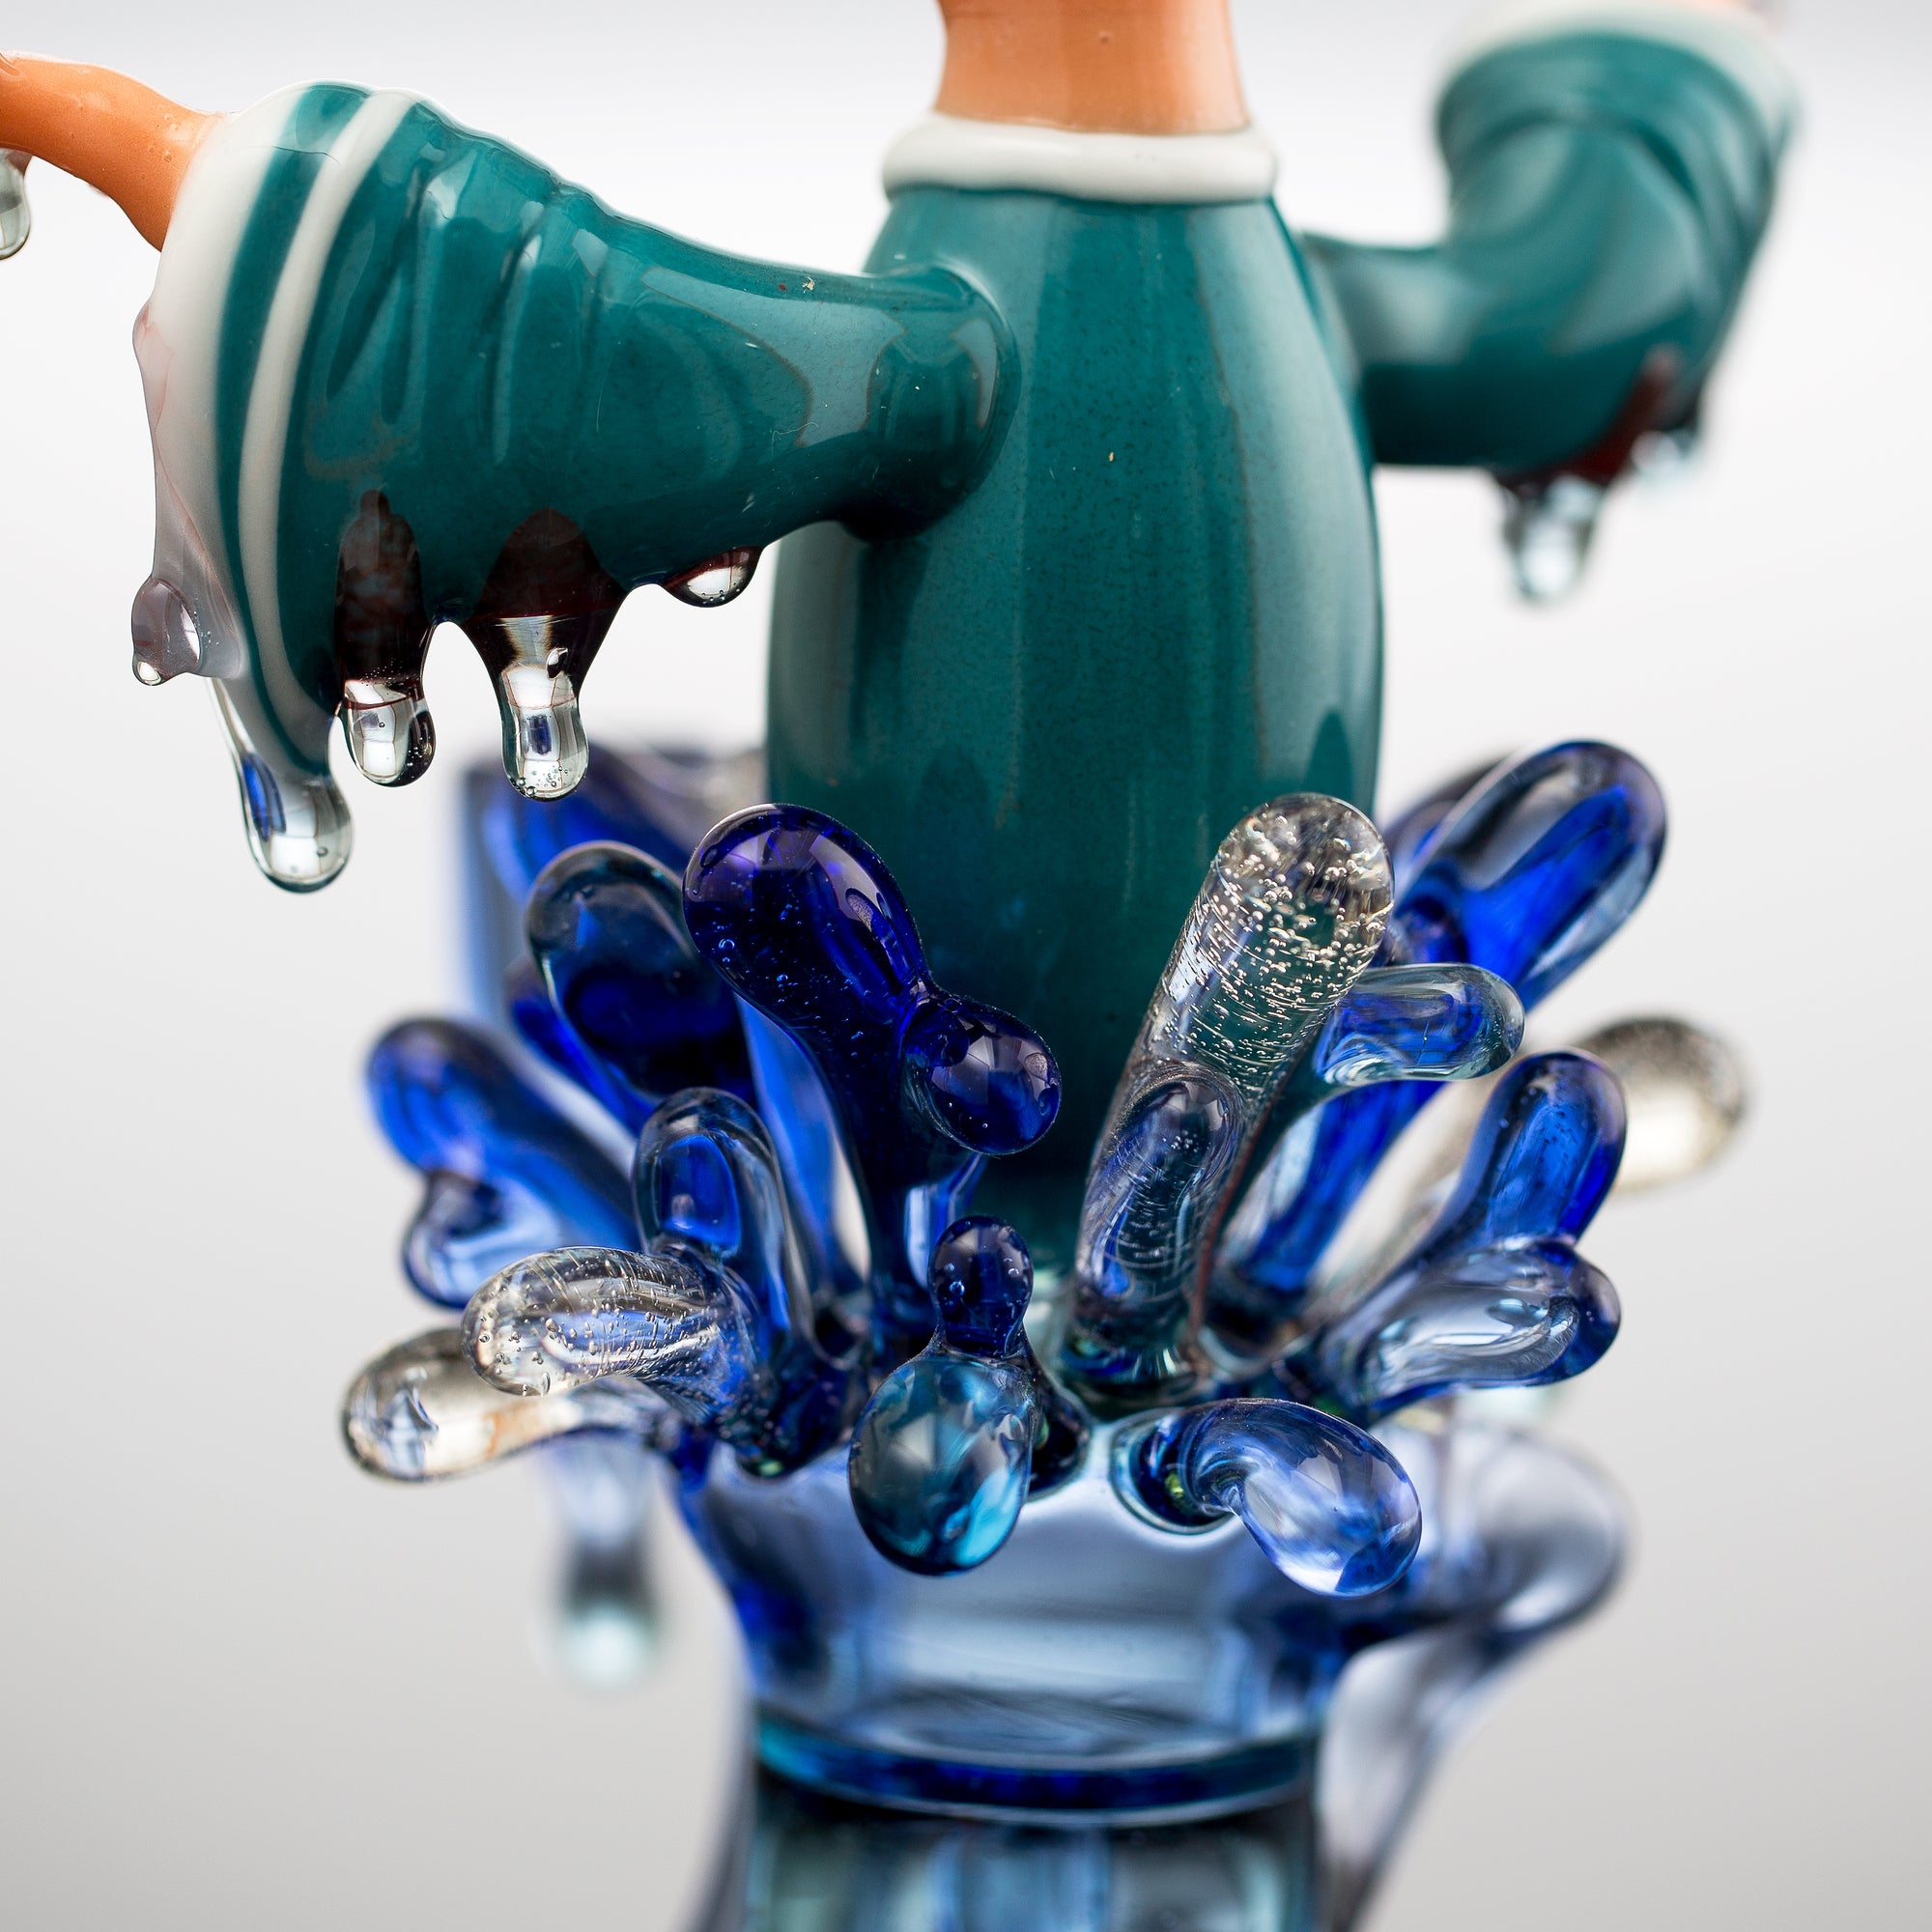 Close up studio photo of R3G15 x Burtoni Water Monk collab showing glass water splashes around the monk waist and mid section. 